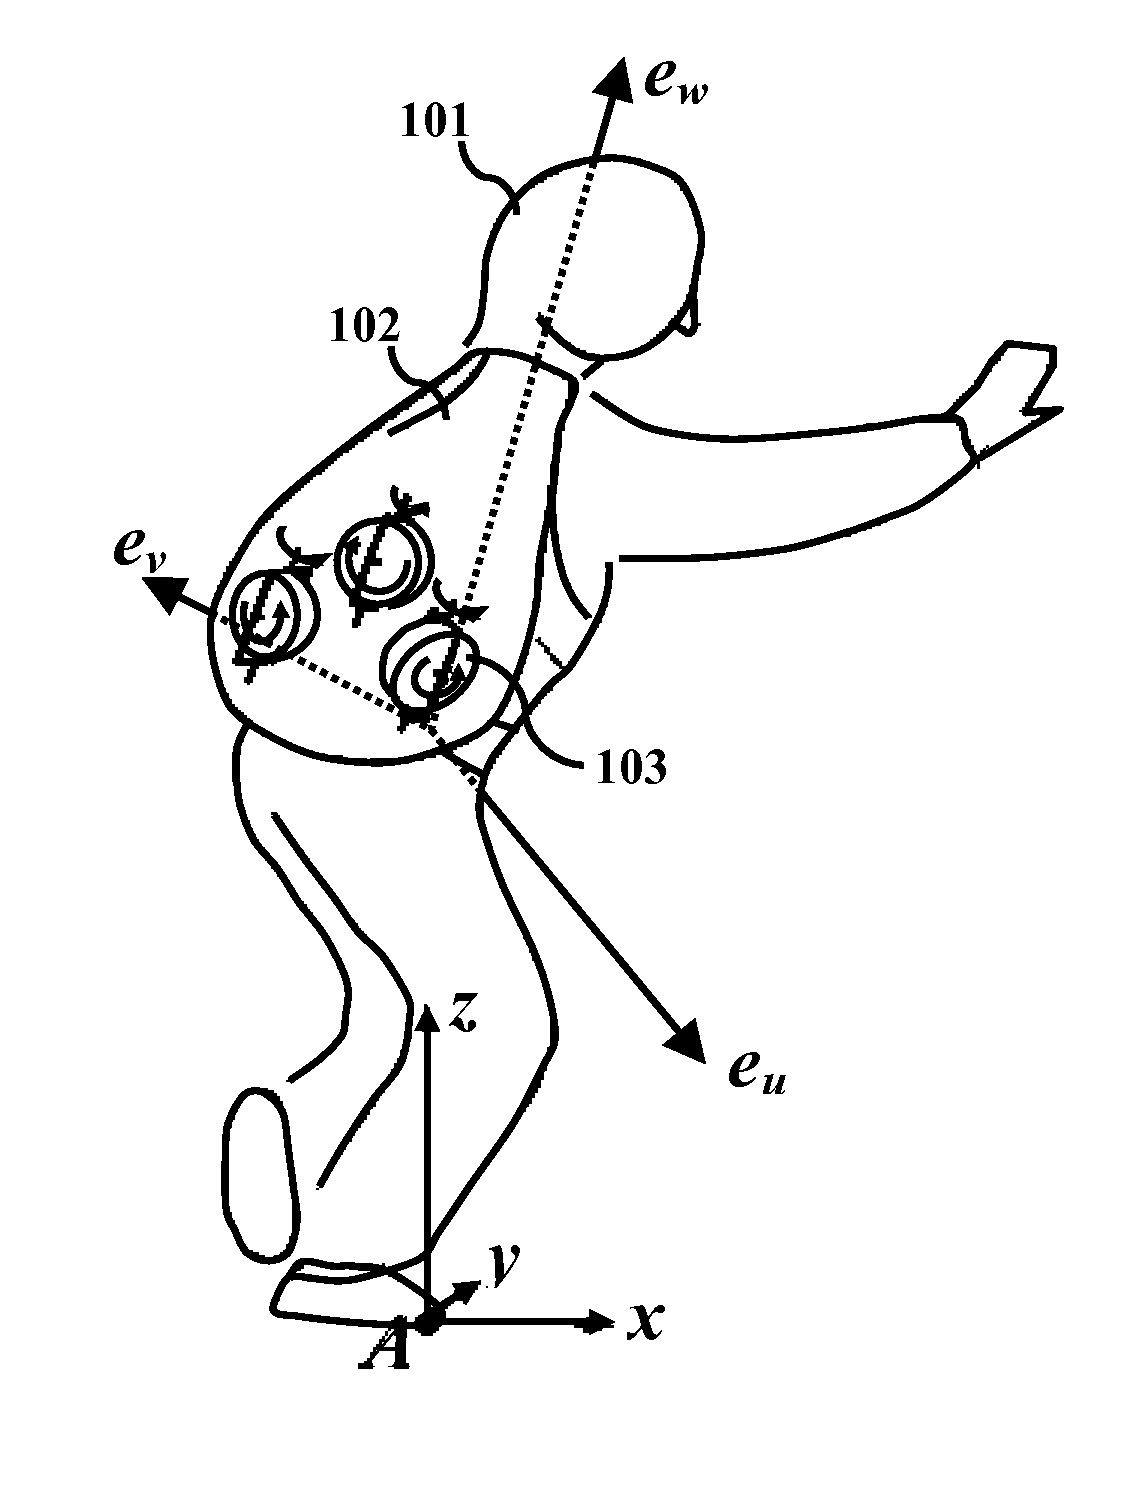 Gyroscopic-assisted device to control balance